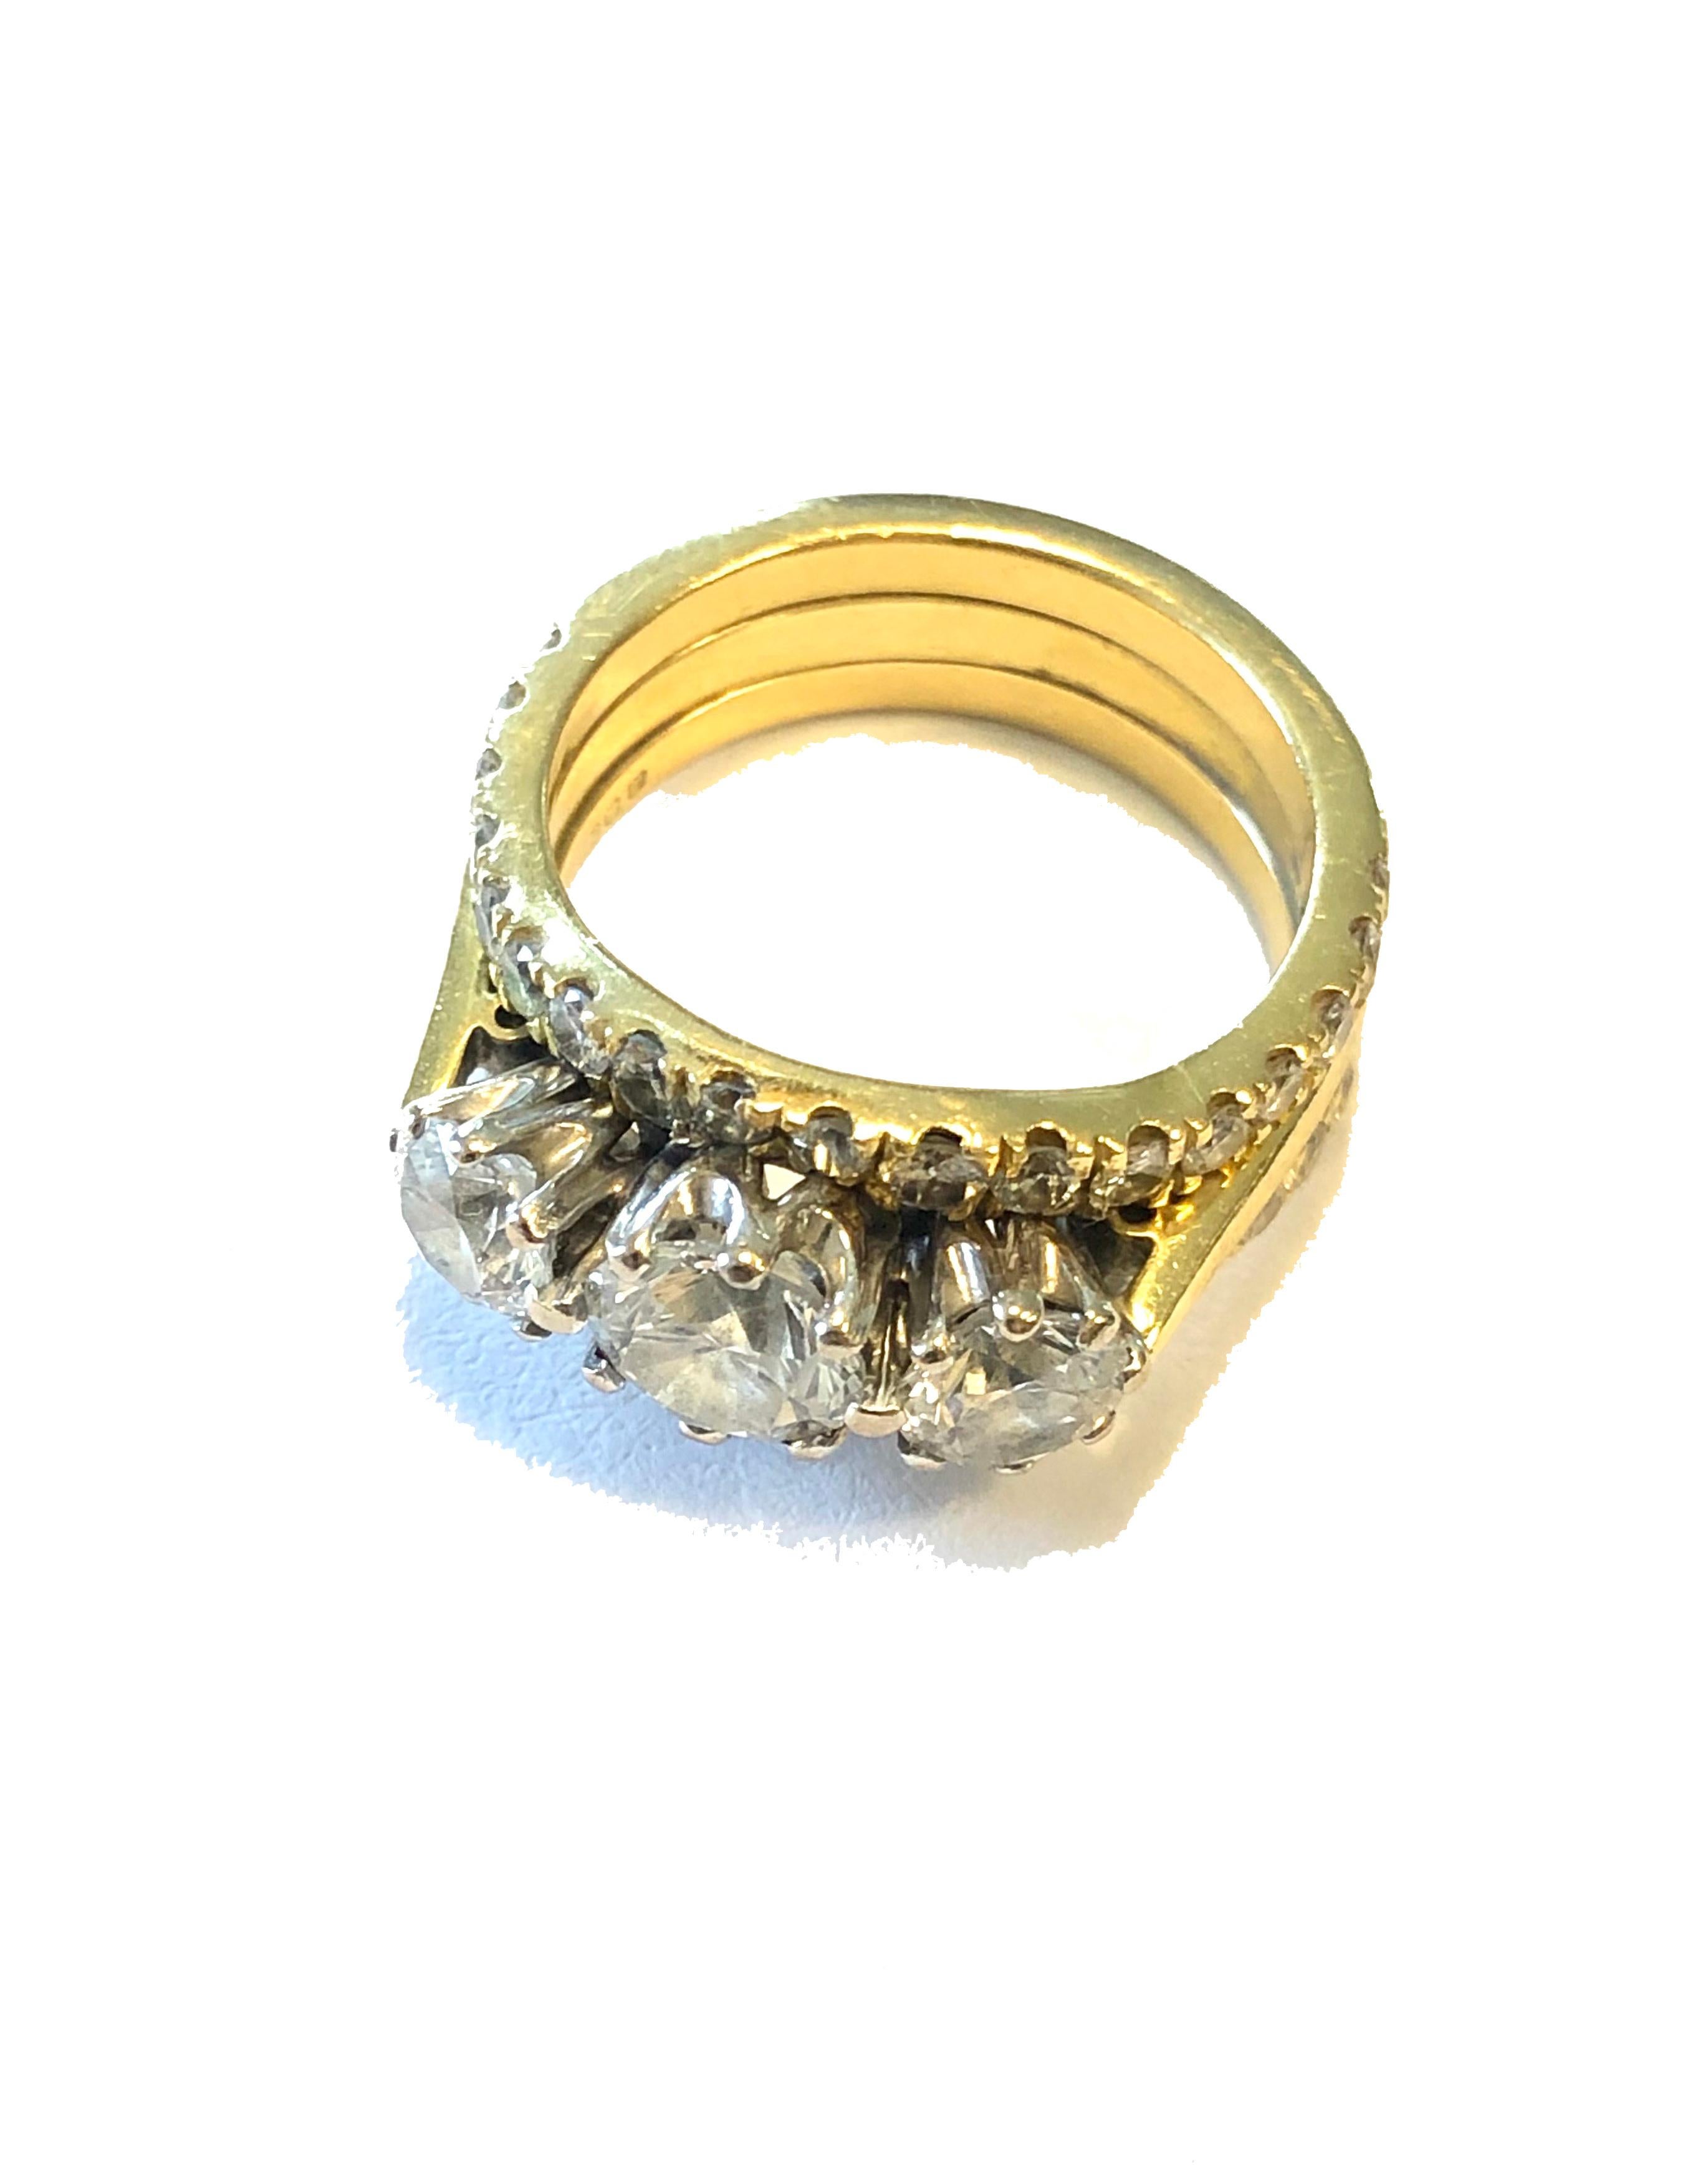 An 18 Kt yellow and white gold 2.16 Ct diamond cluster ring. The three stone diamond central ring in yellow gold, the diamonds set in white gold, the central brilliant cut diamond 0.75 Ct with two round brilliant cut diamonds of 0.4 Ct and 0.41 Ct